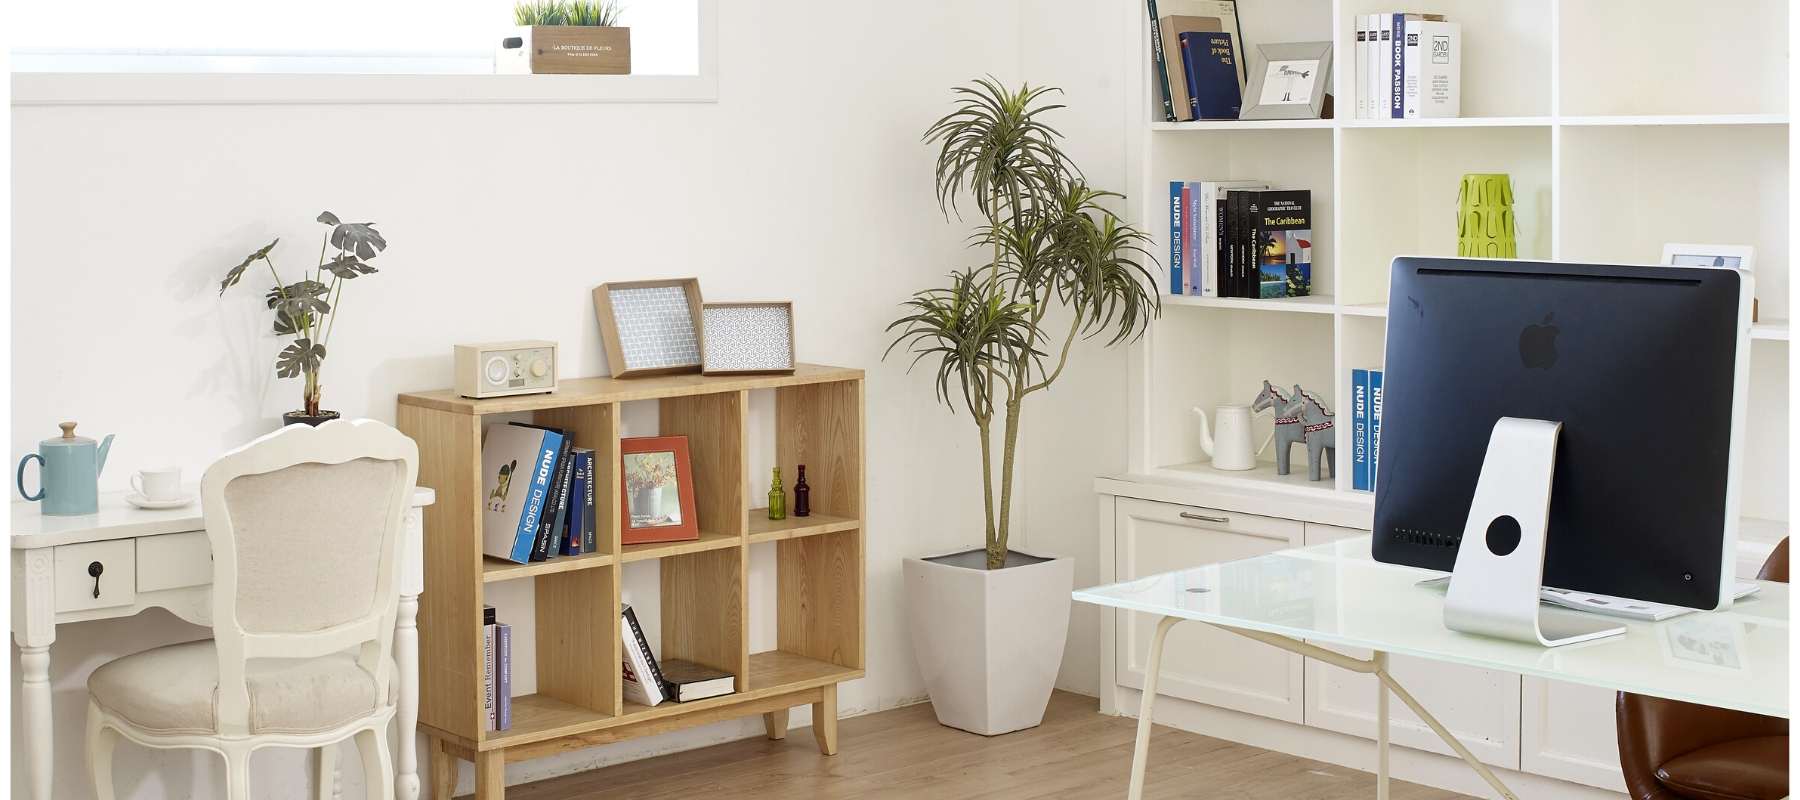 Home office with wooden storage unit